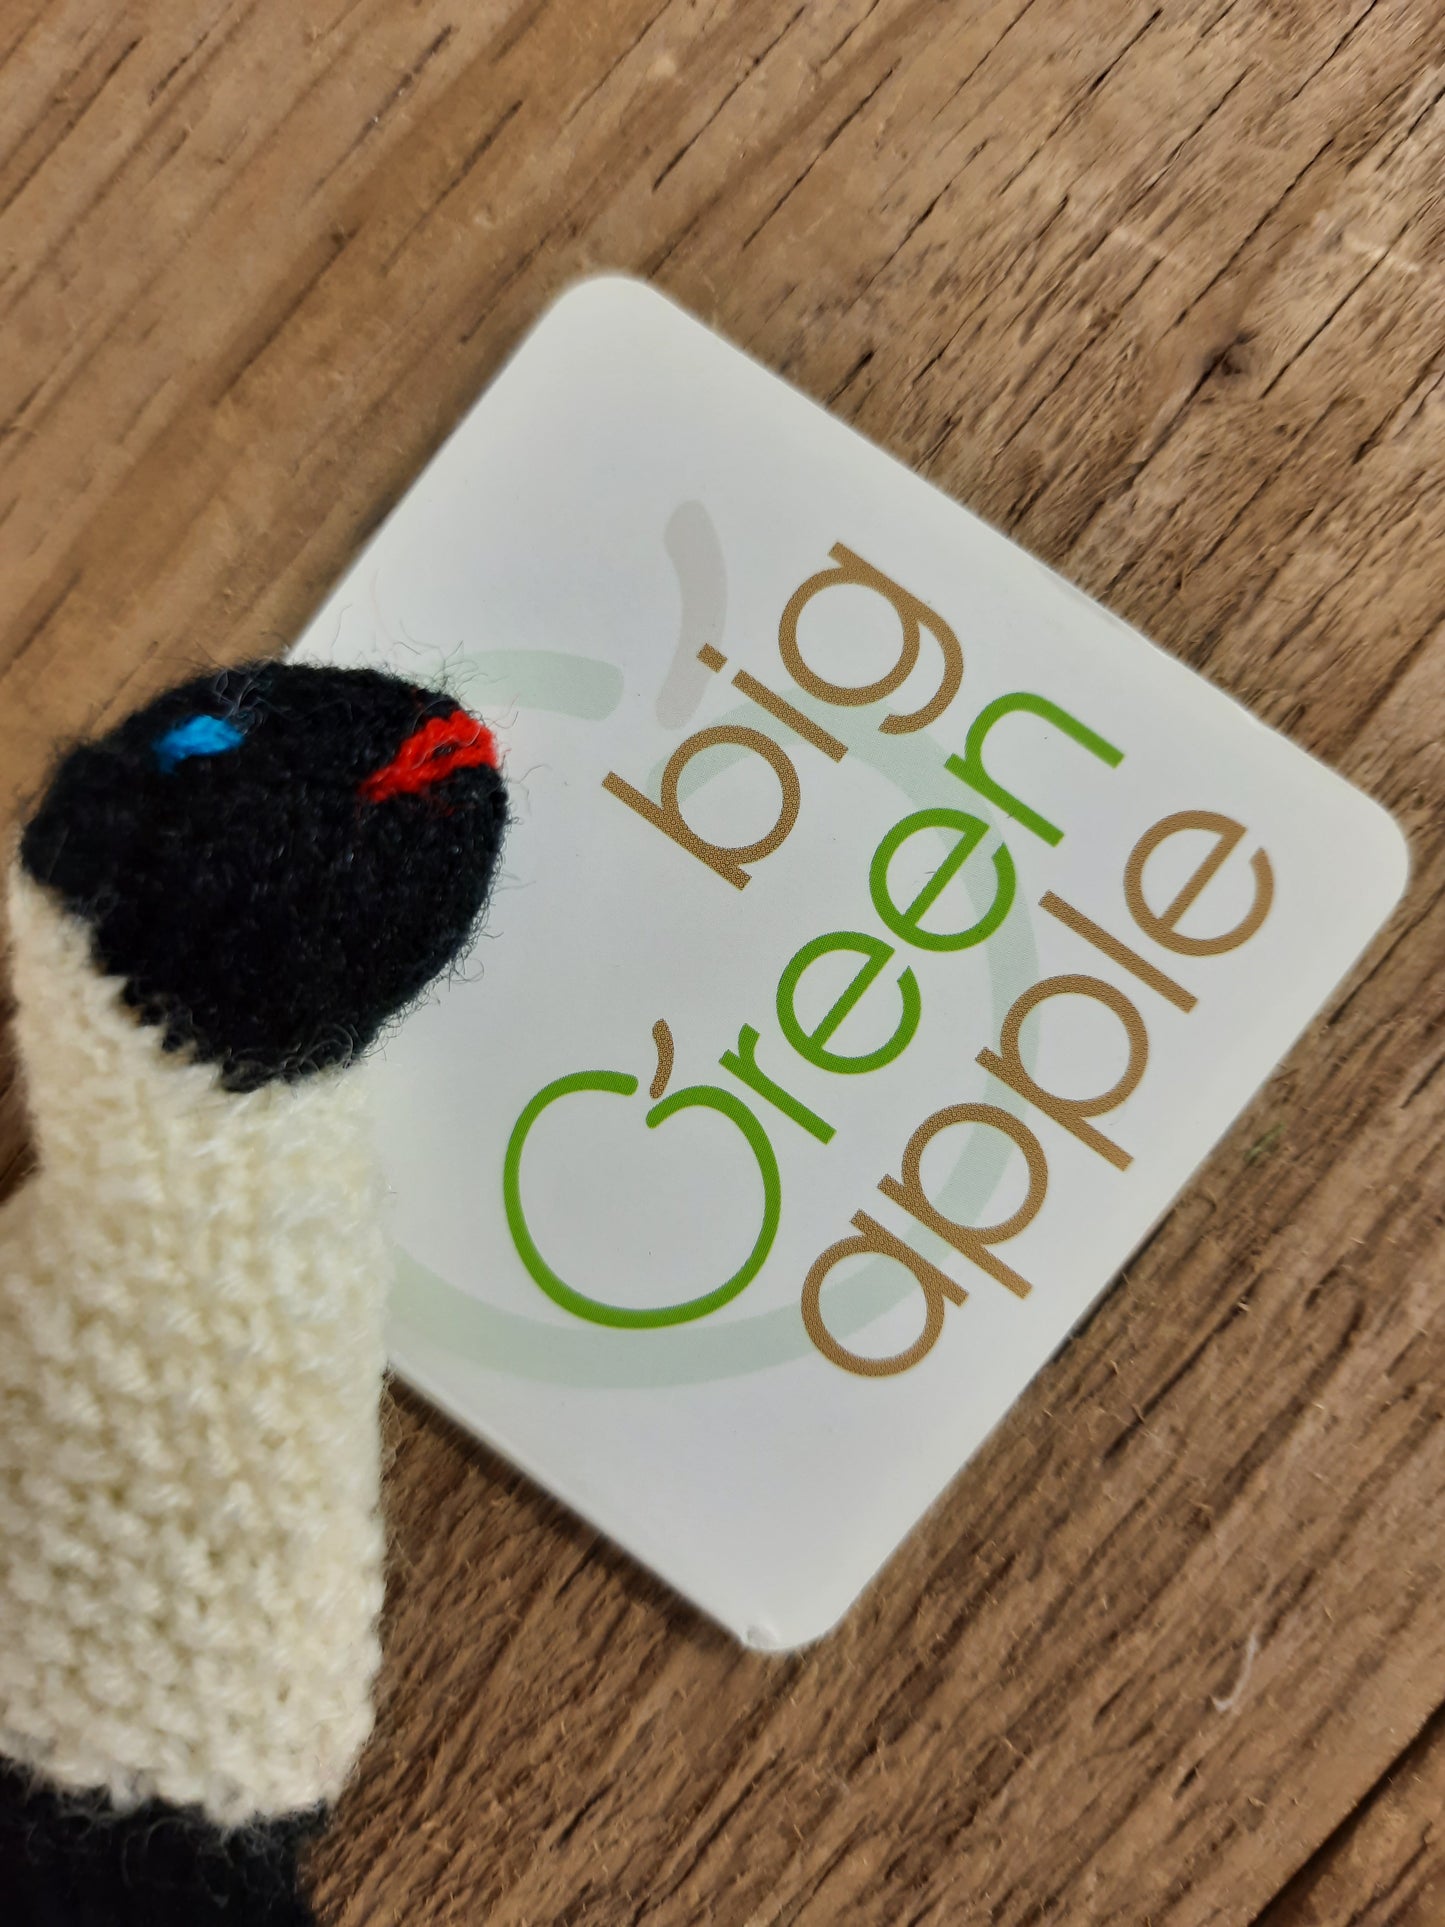 Finger Puppets | Sheep | Ethical Online Shopping | Eco Friendly Companies